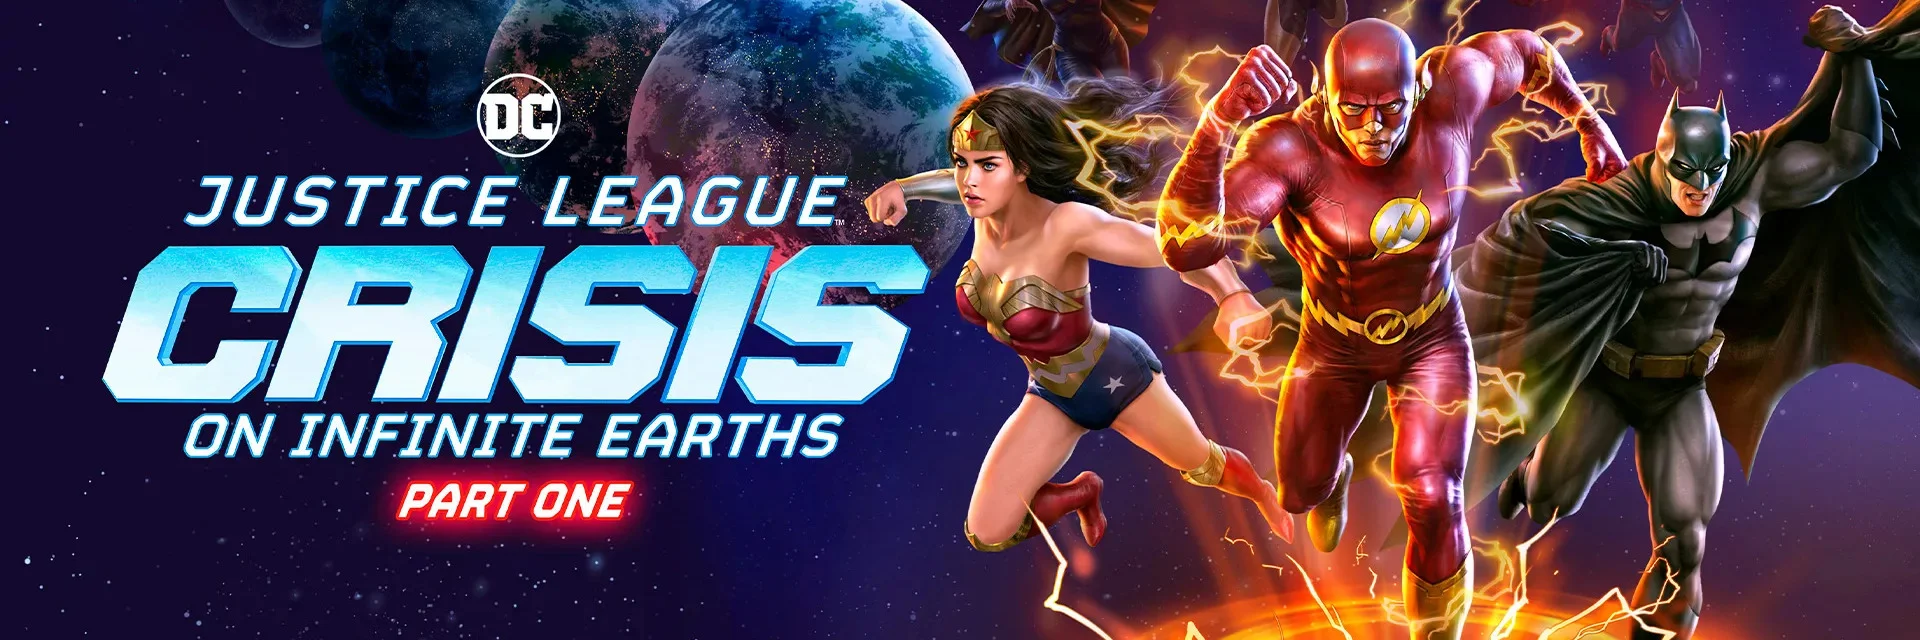 Justice League: Crisis on Infinite Earths - Part One 4K 2024 big poster